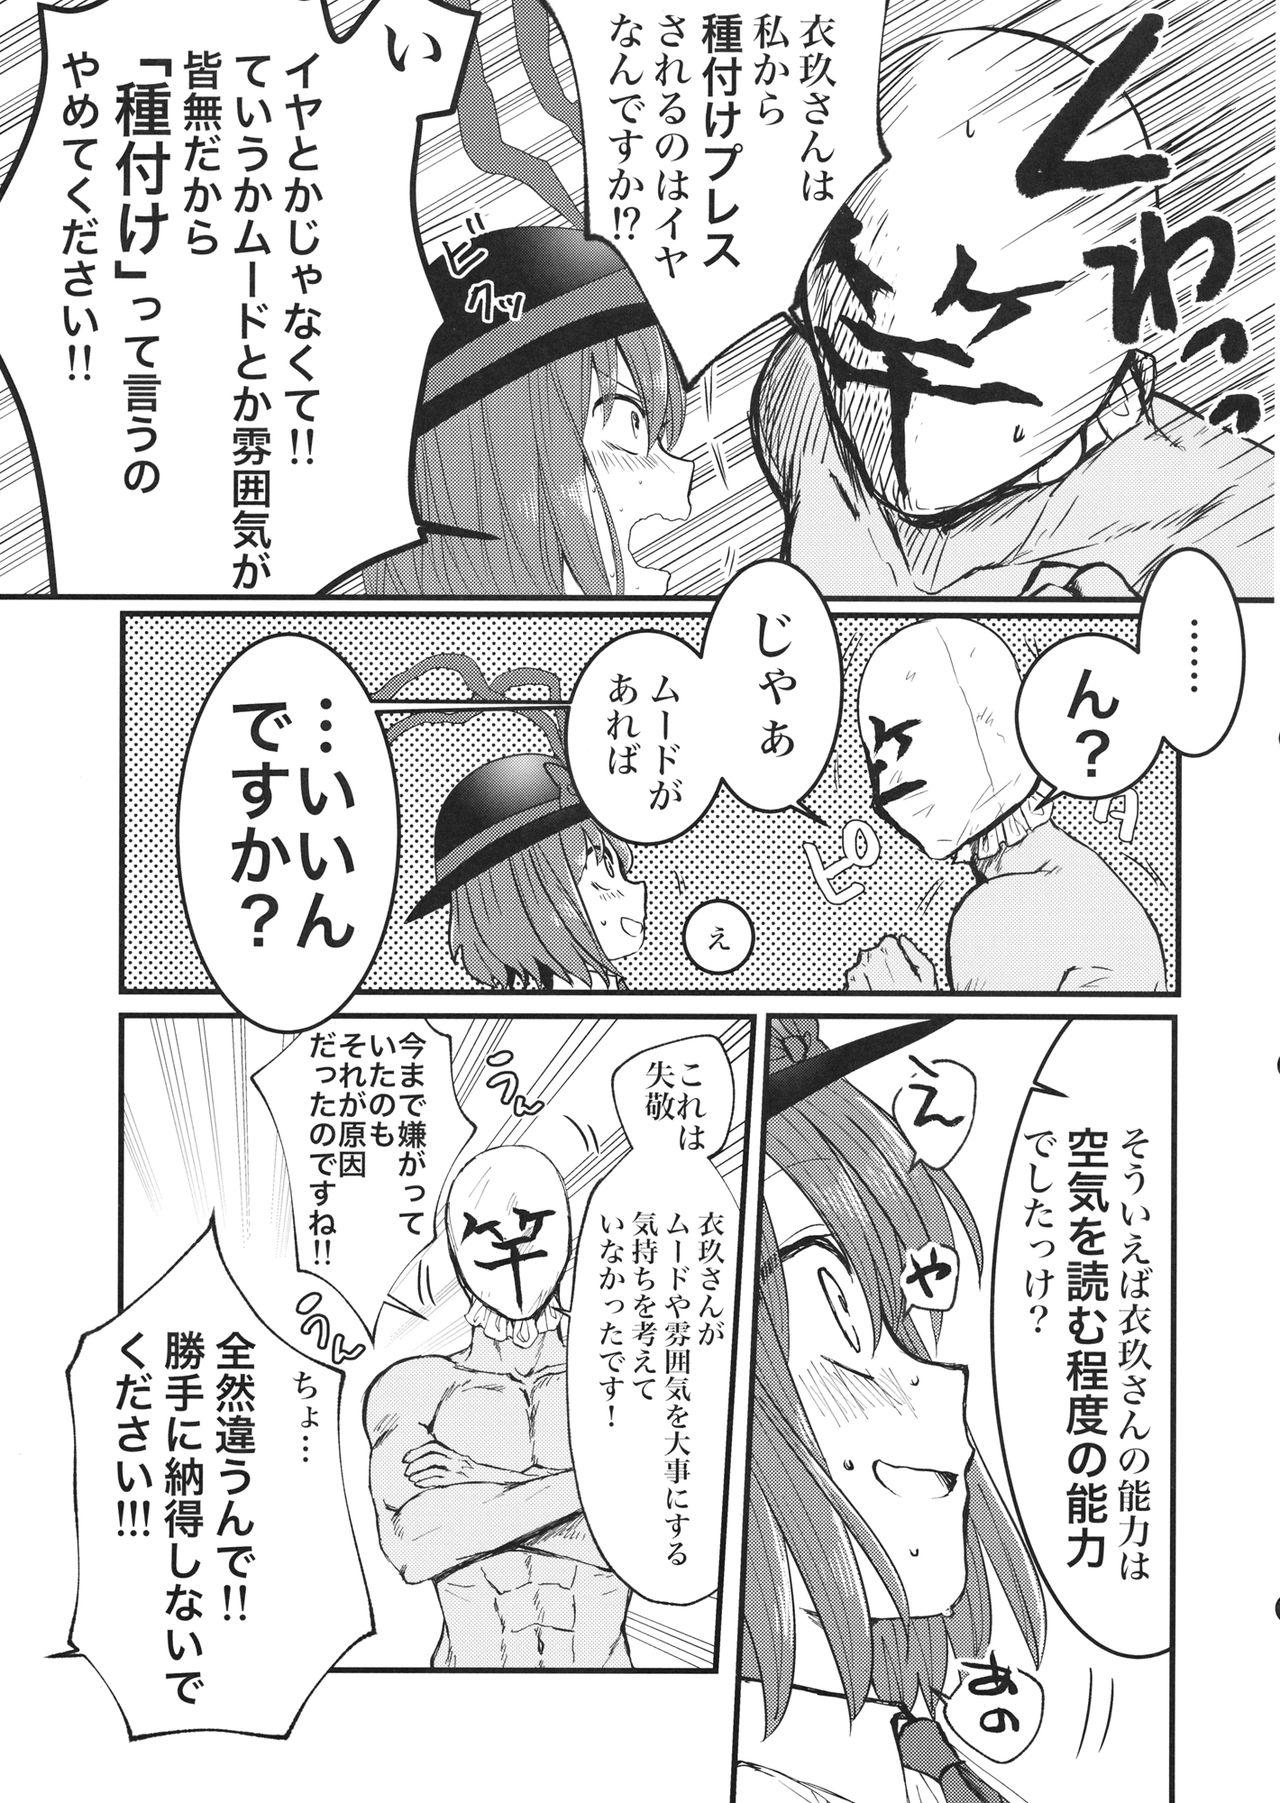 Culo 衣玖さんと一緒に色々頑張る本 - Touhou project Girls Getting Fucked - Page 8